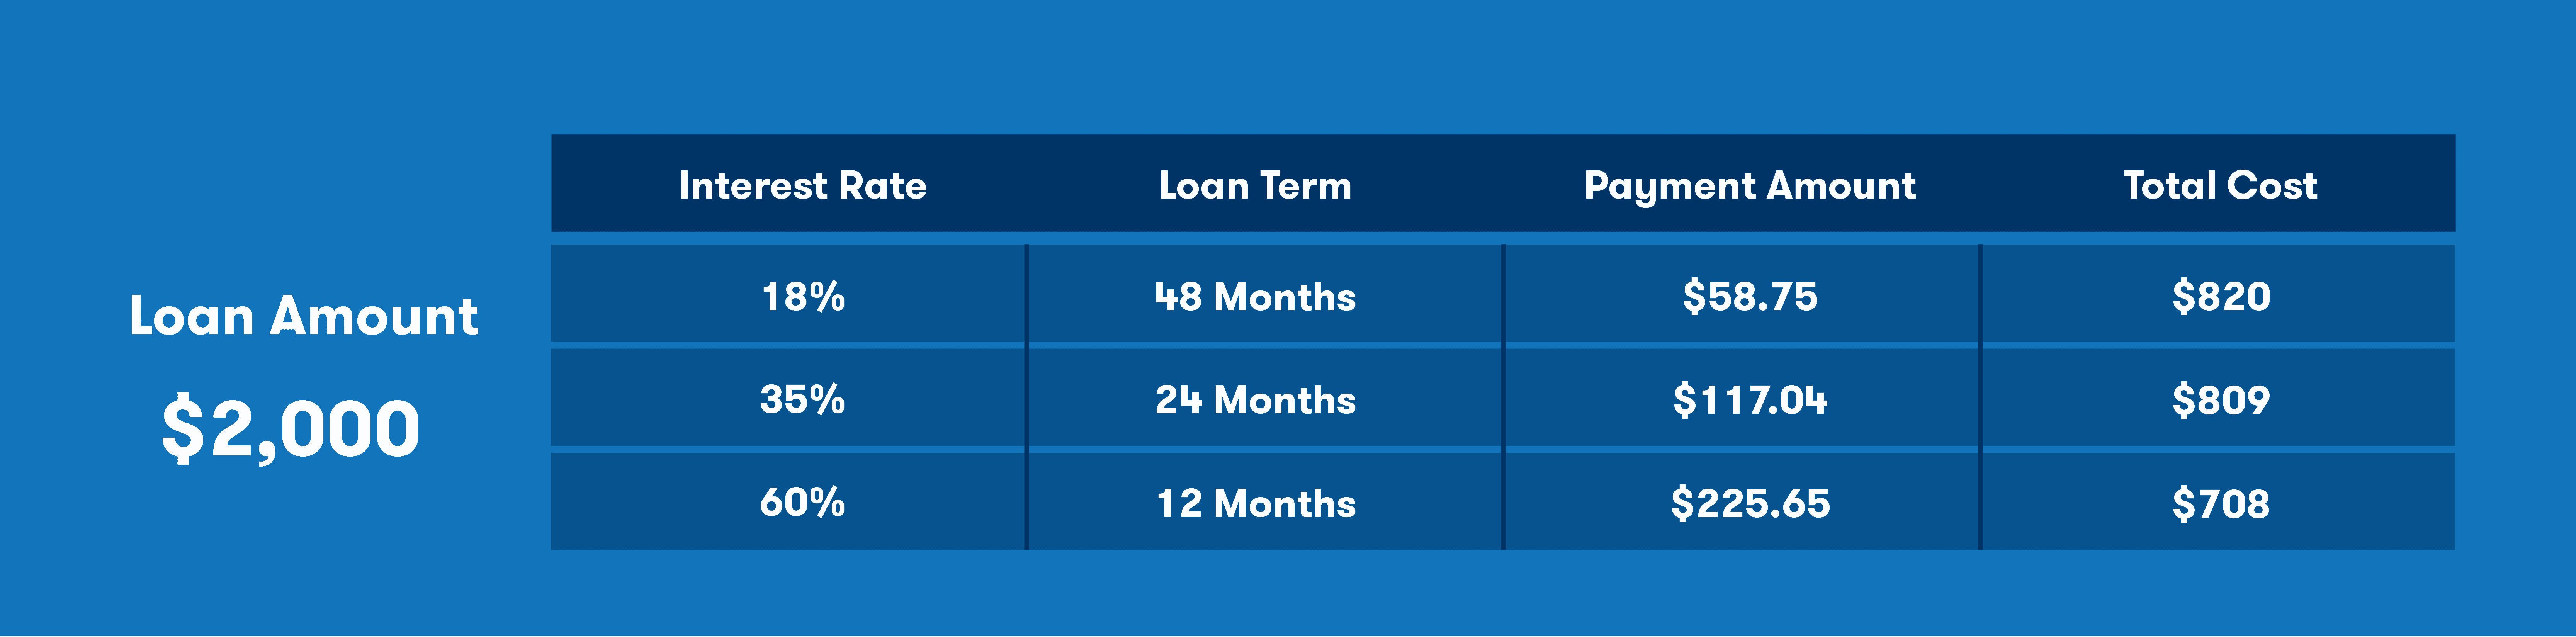 Chart showing the total interest paid on a loan based on the interest rate.